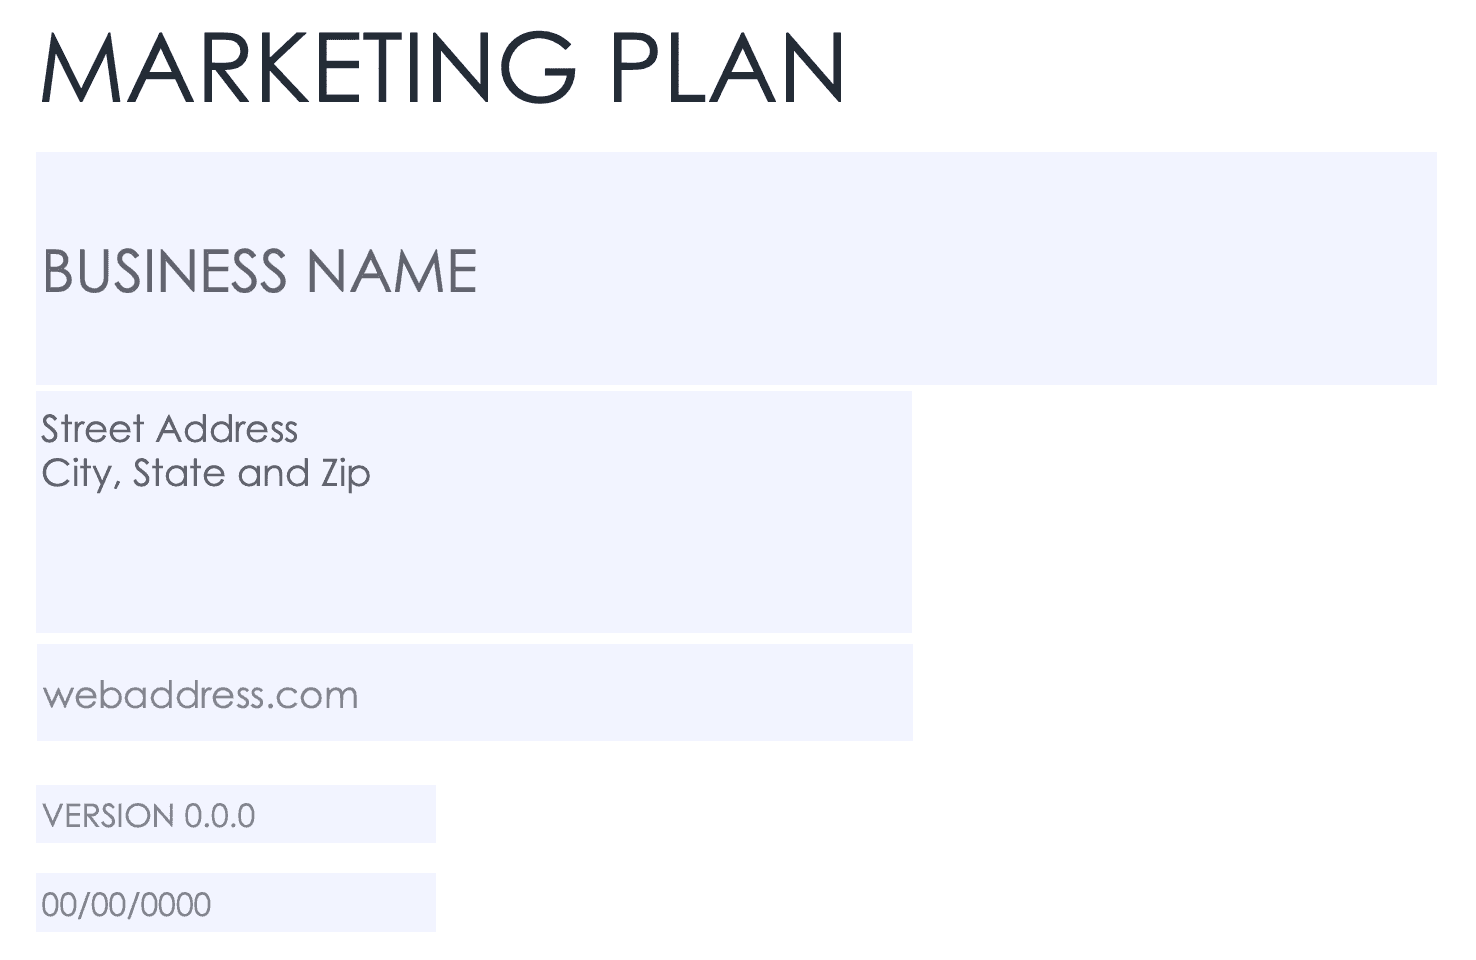 Example of a marketing plan cover page